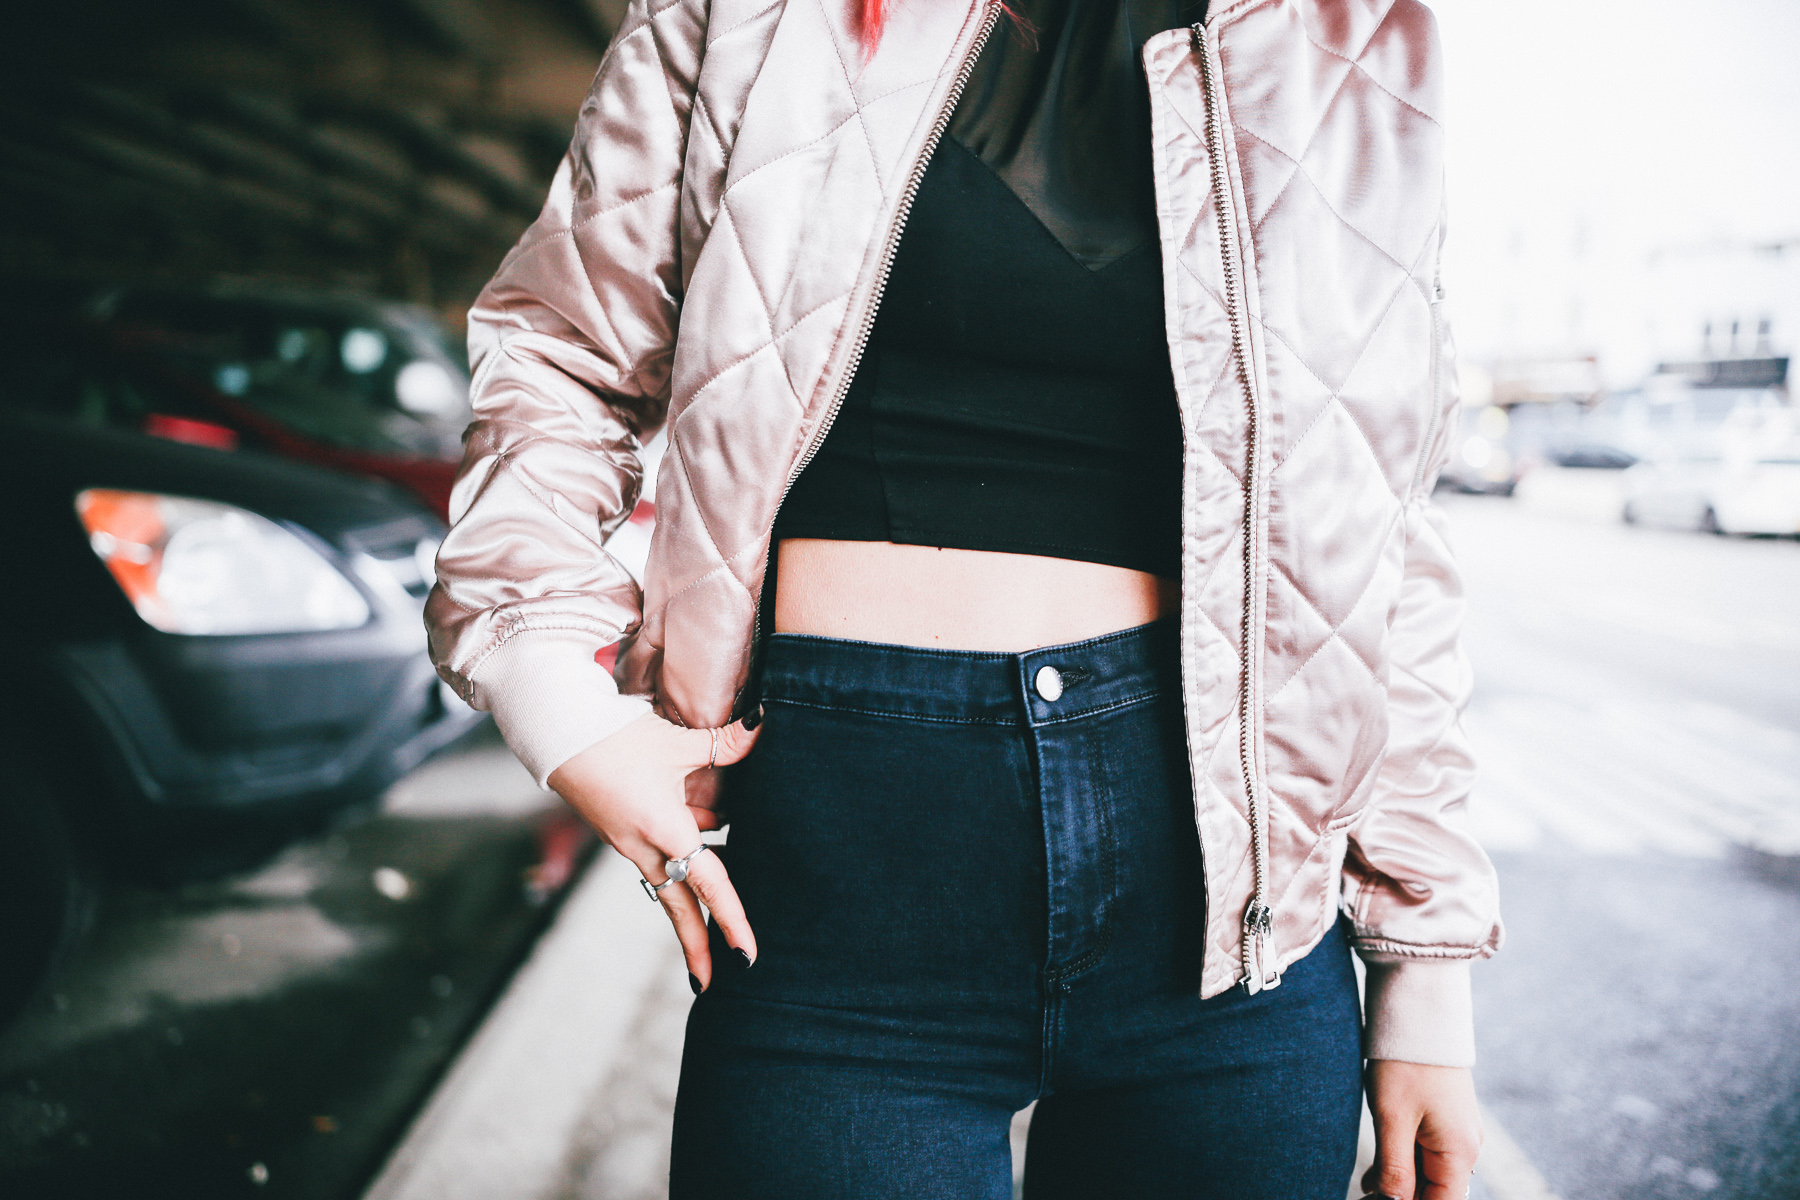 Le Happy wearing Topshop Joni jeans and satin bomber jacket